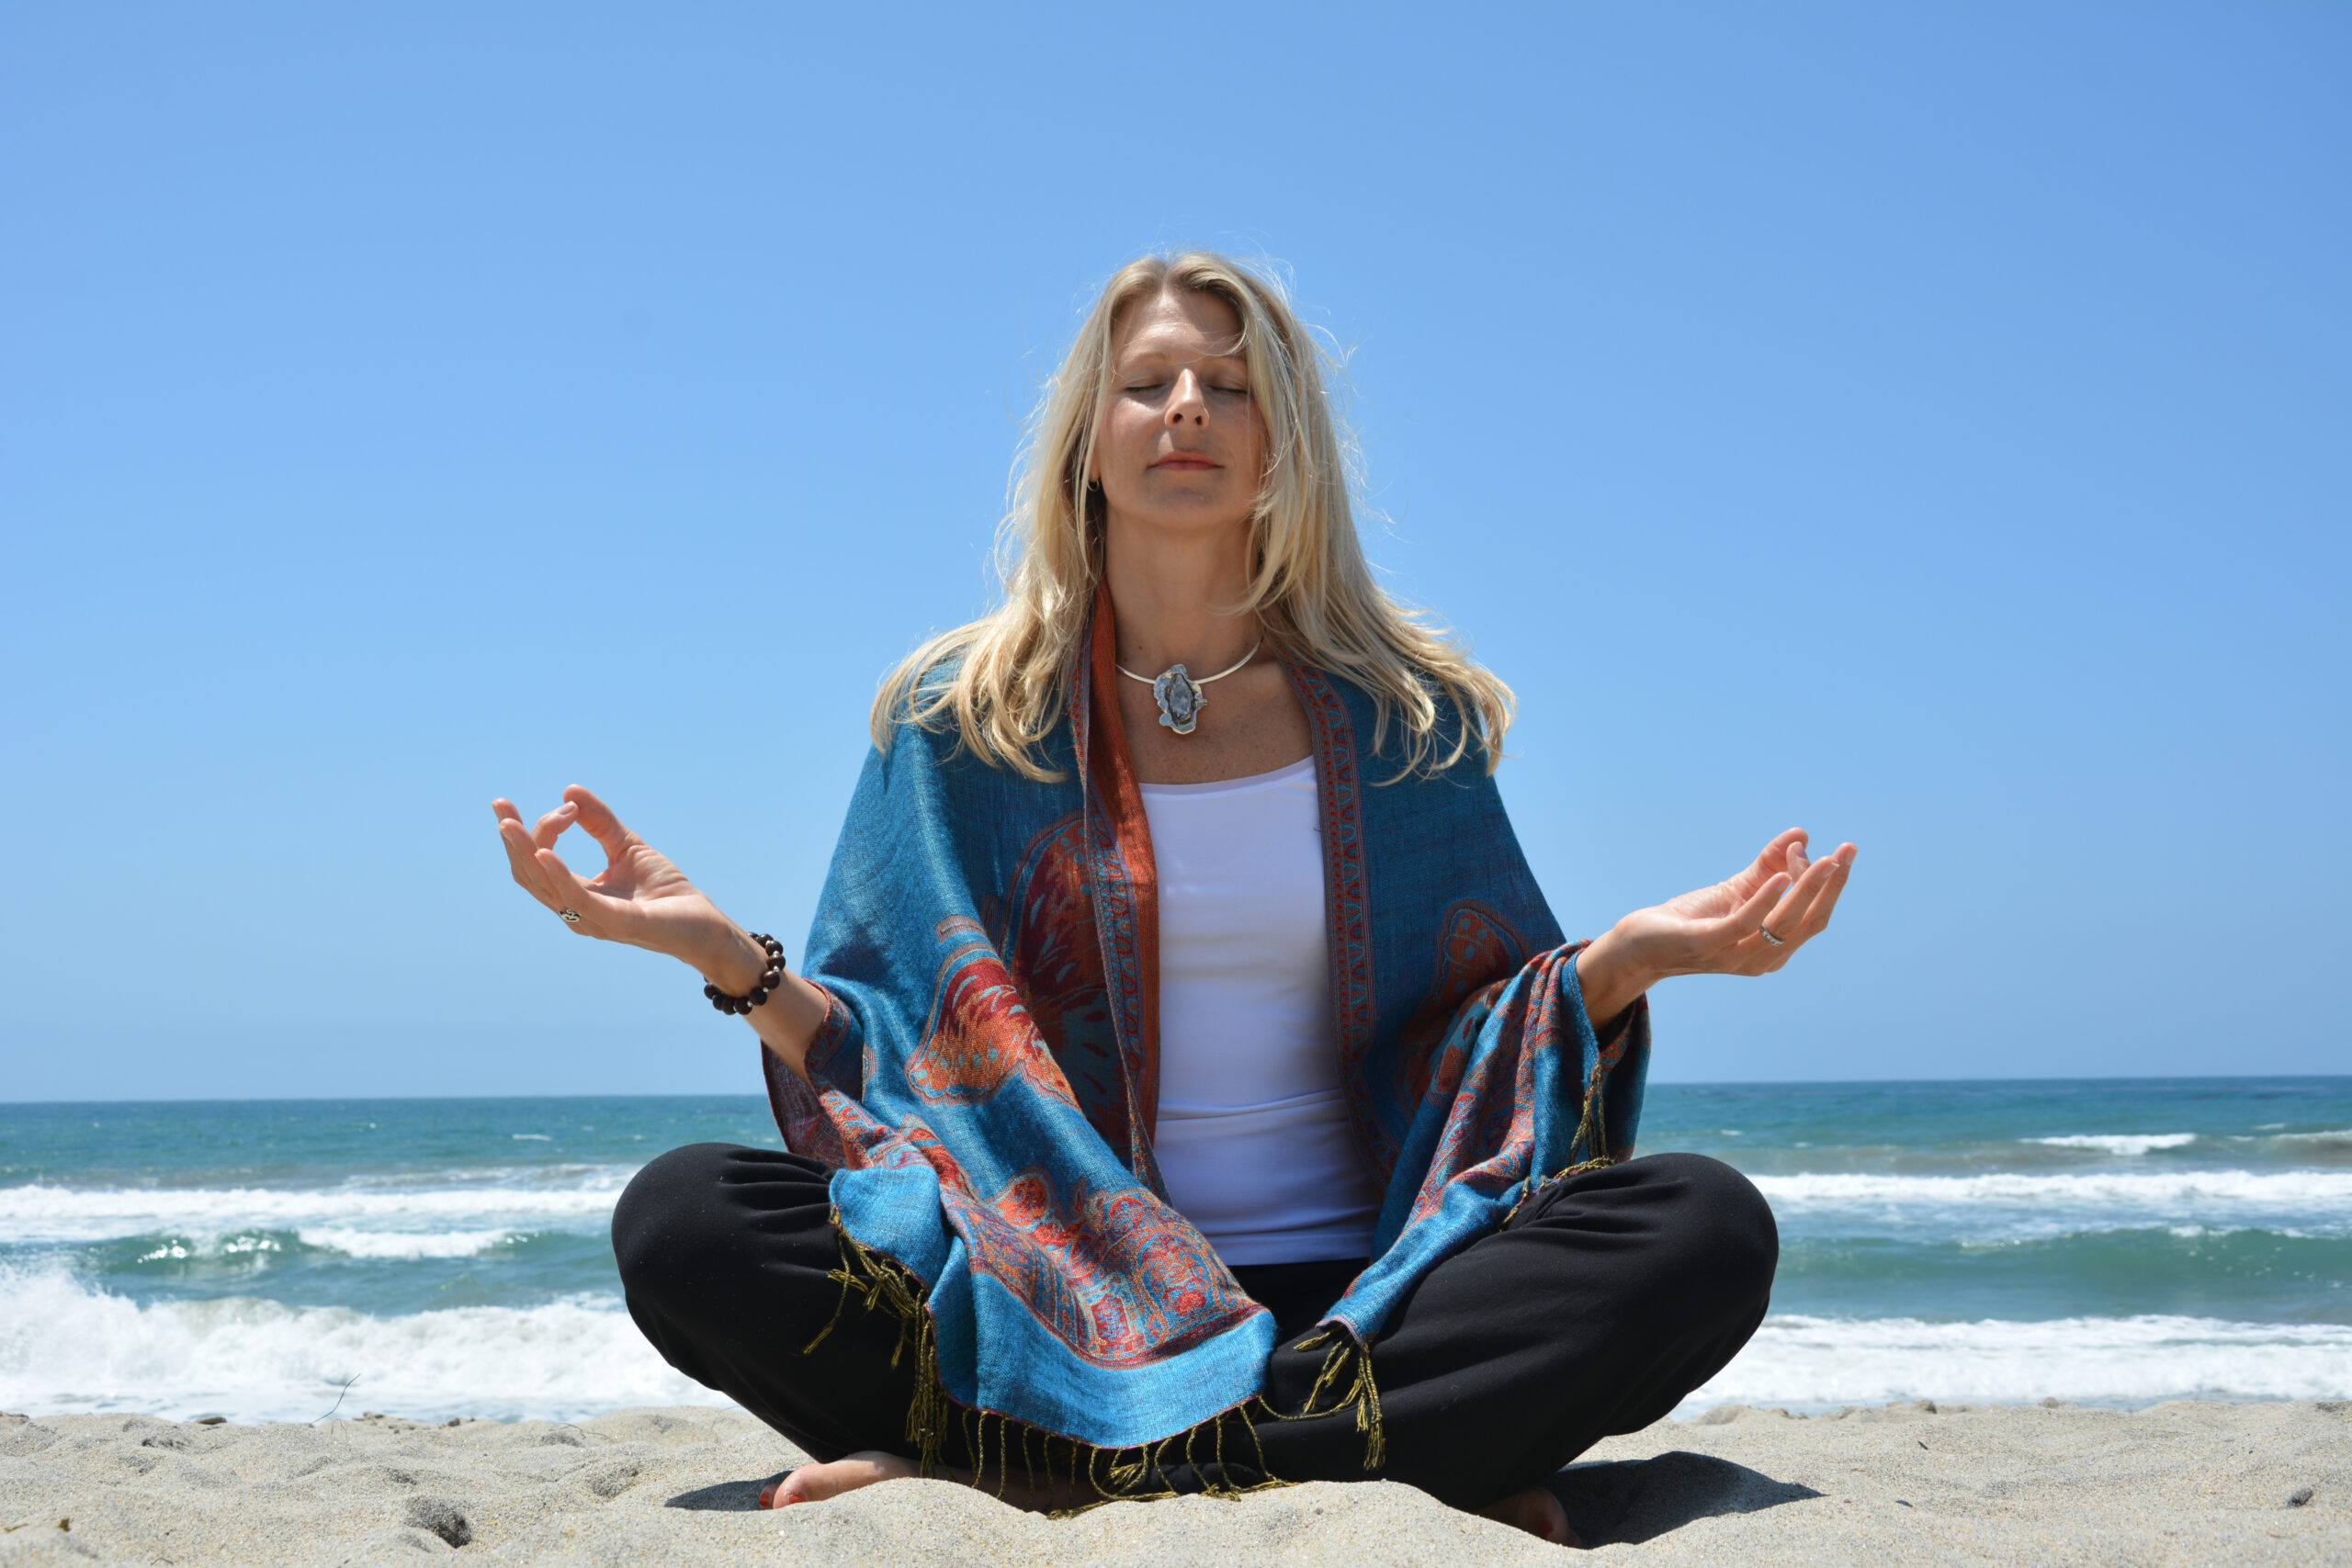 RE-Boot your practice with me seaside this October! Click to LEARN MORE!